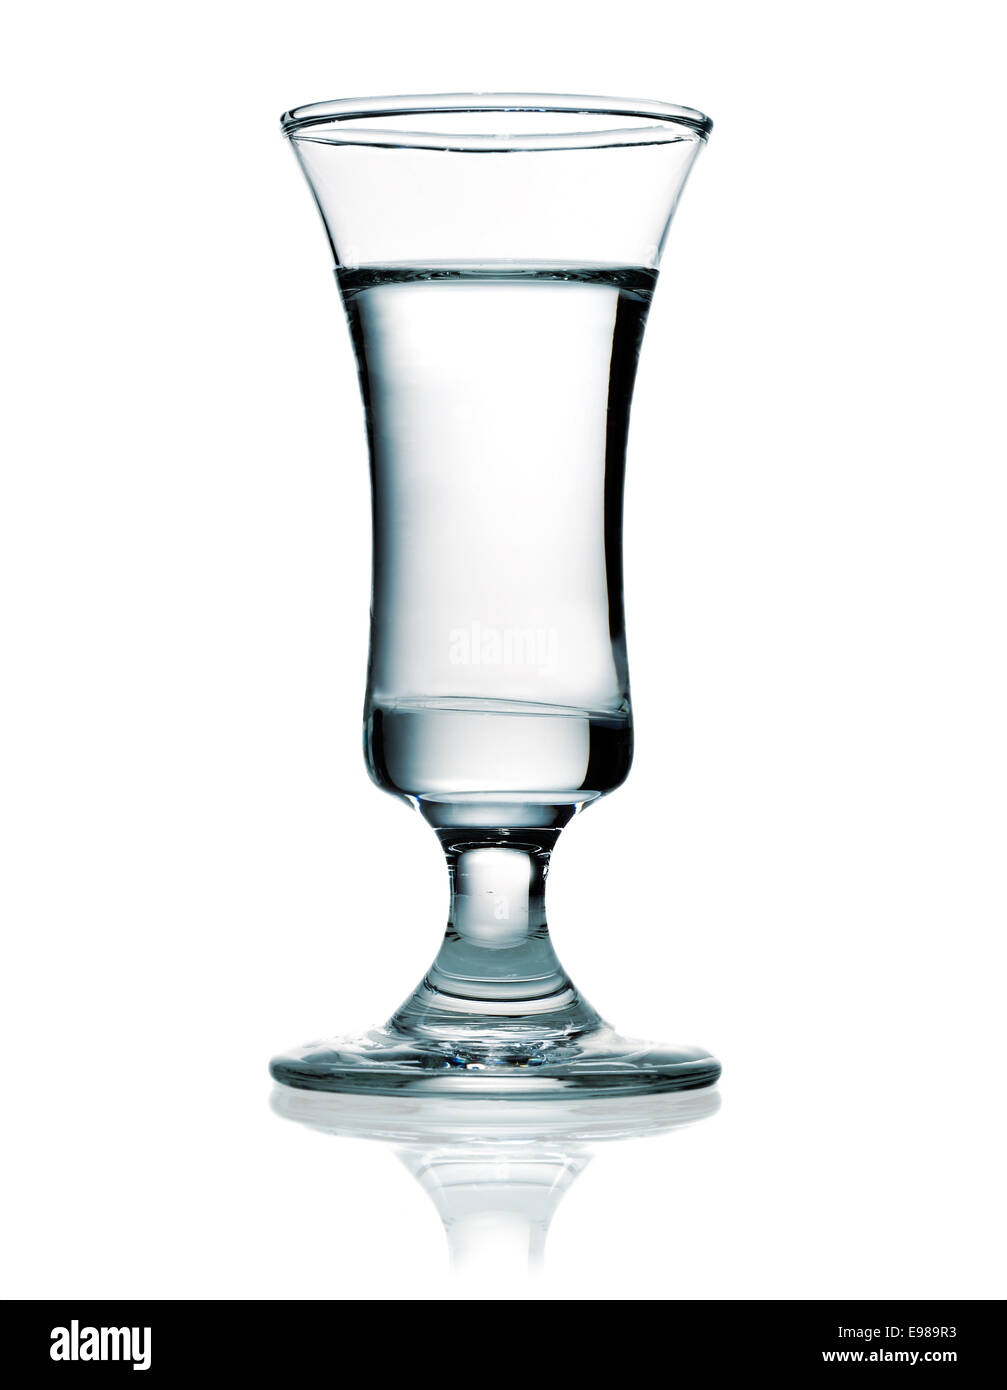 Shot glass filled with vodka which is a distilled beverage and one of the most popular alcoholic drinks Stock Photo